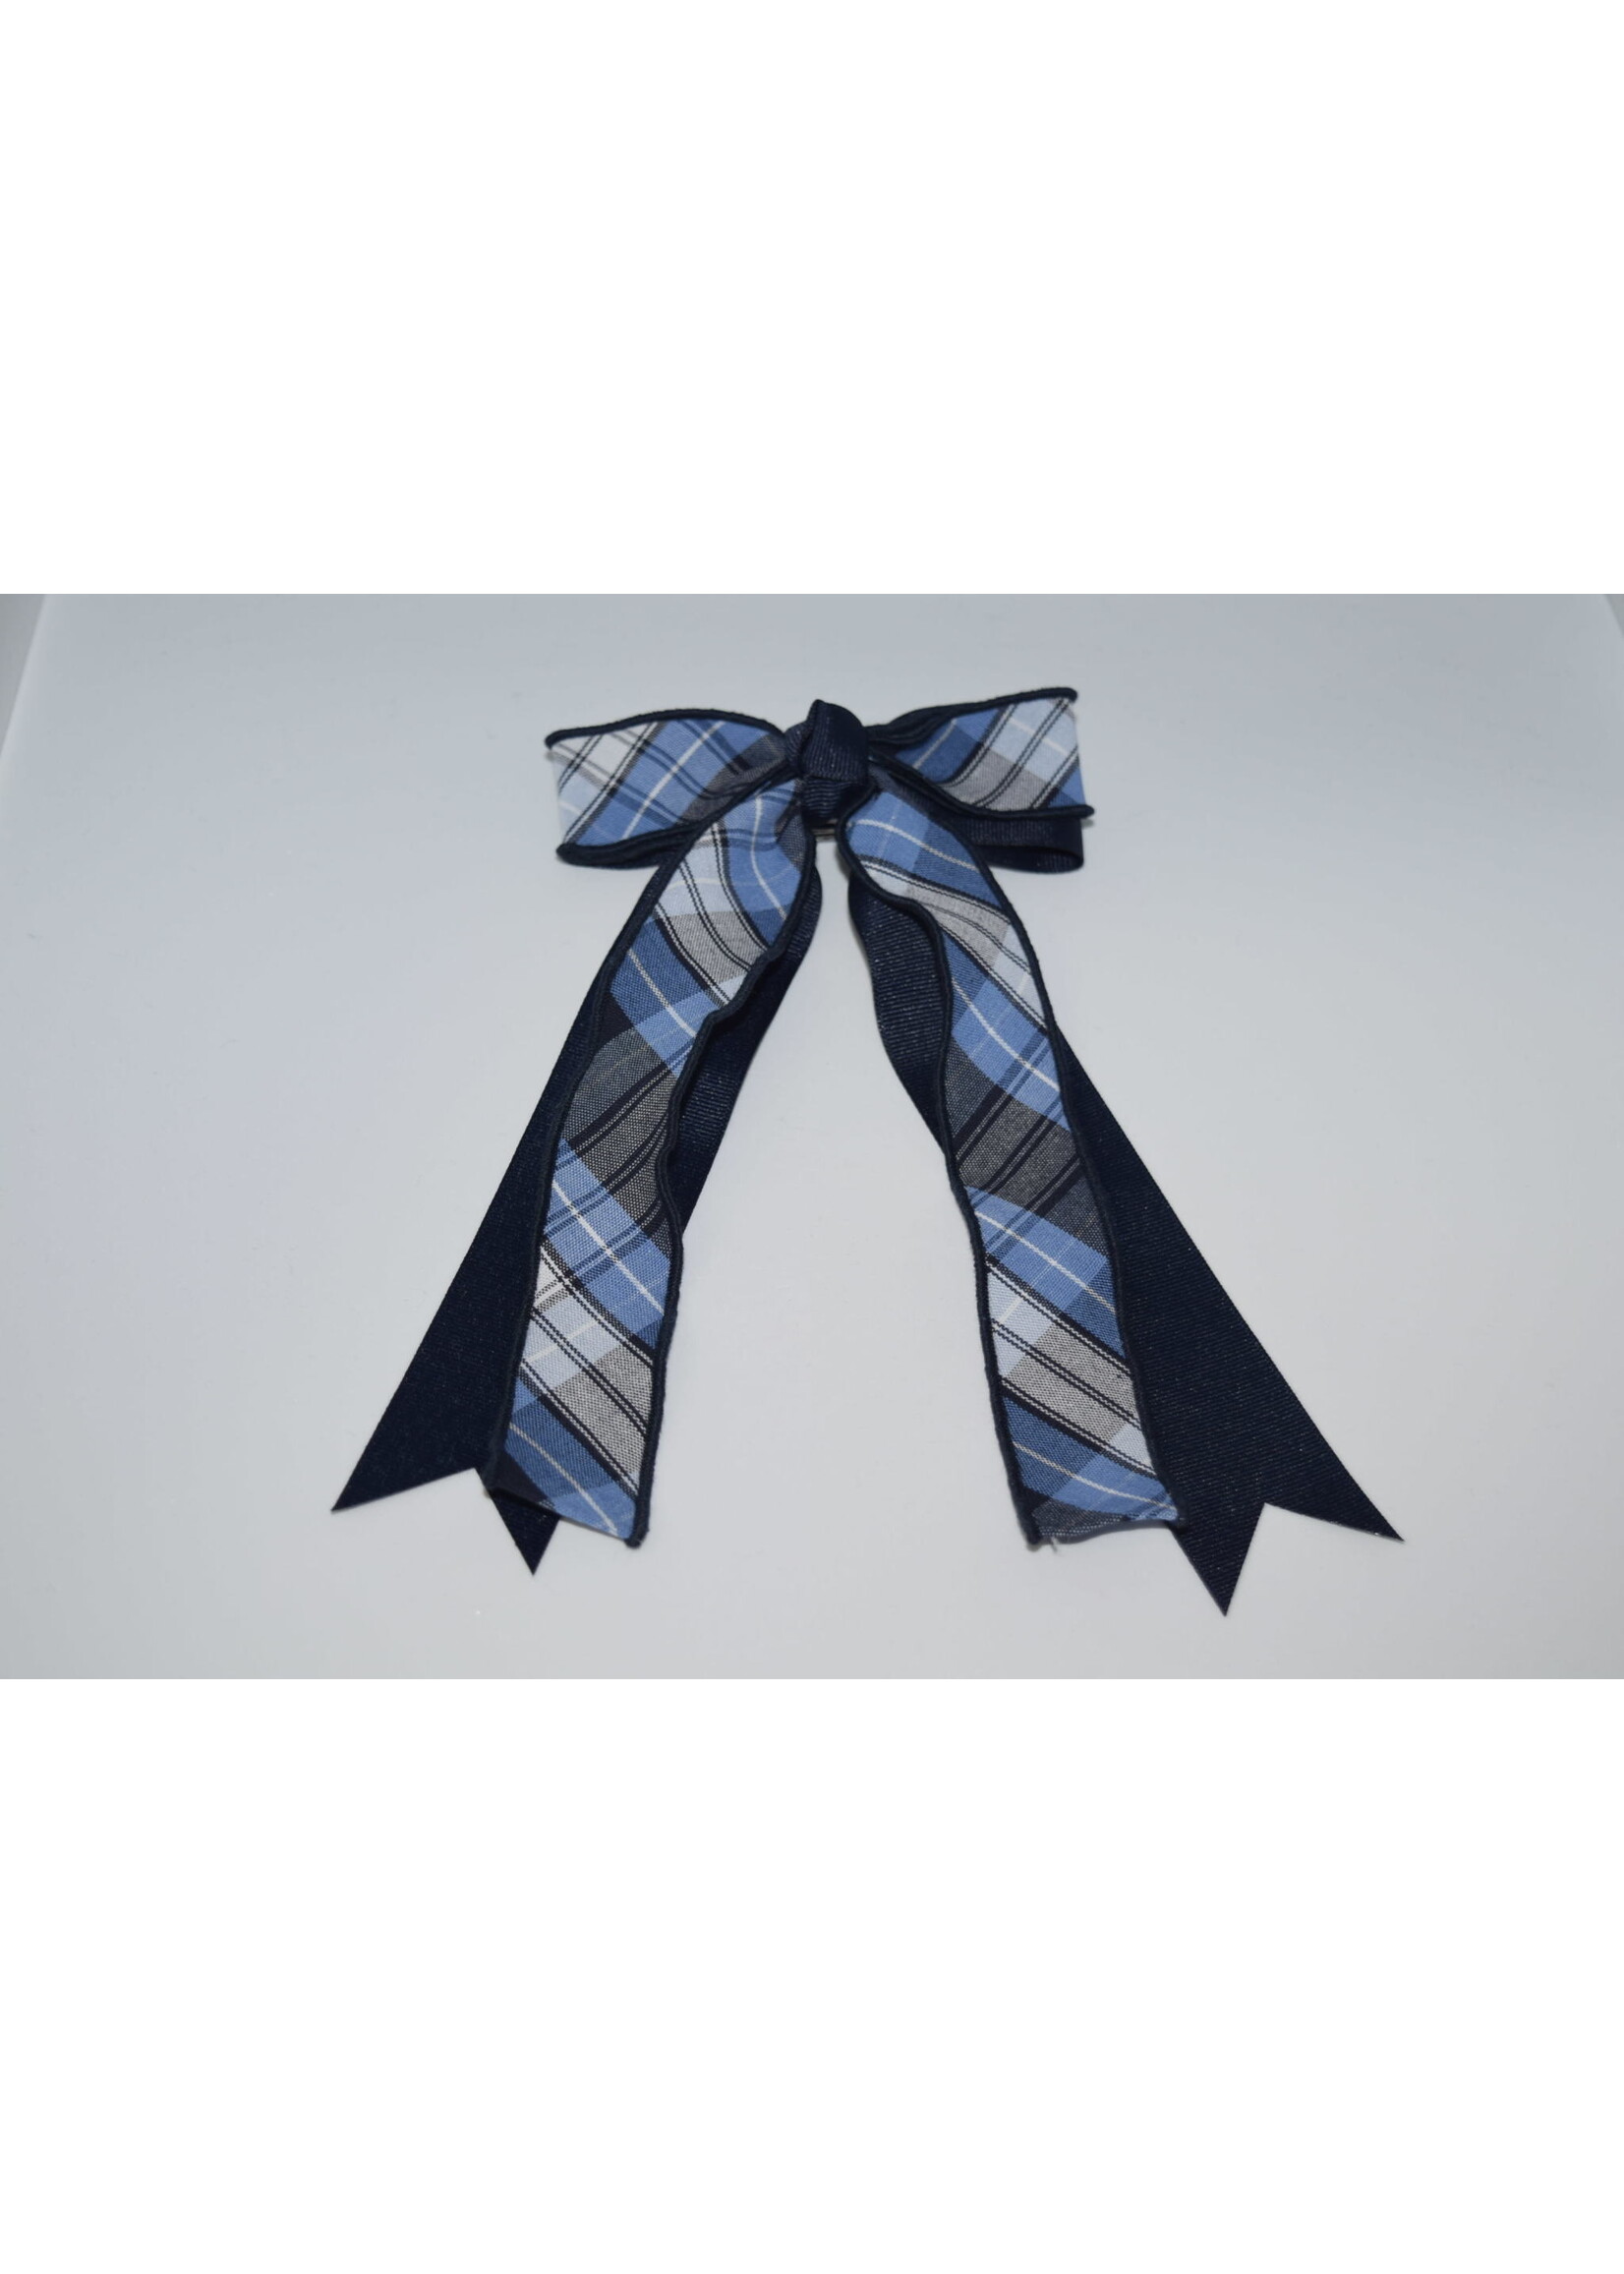 Large 2-layered plaid & grosgrain ribbon bow w/tails P76 NVY